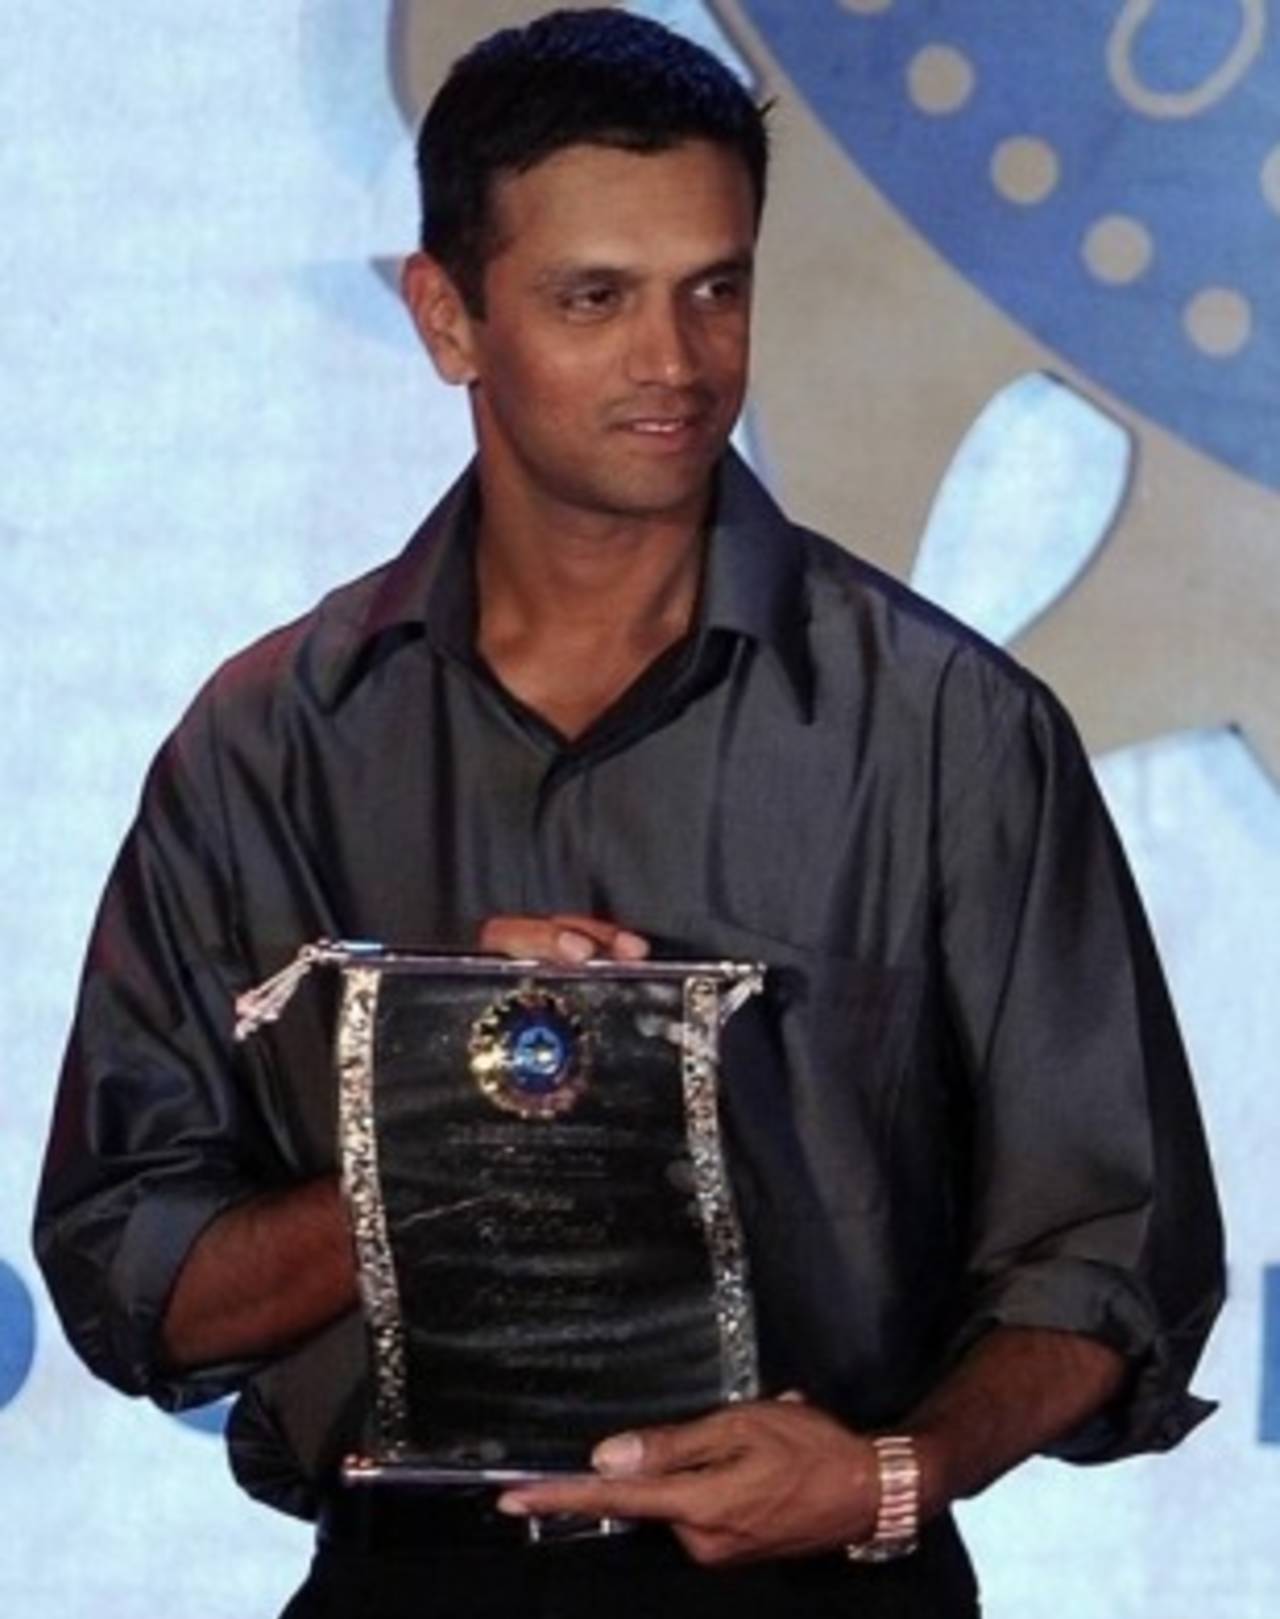 Rahul Dravid was presented a commemorative plaque for taking most catches in Tests, Mumbai, December 6, 2009